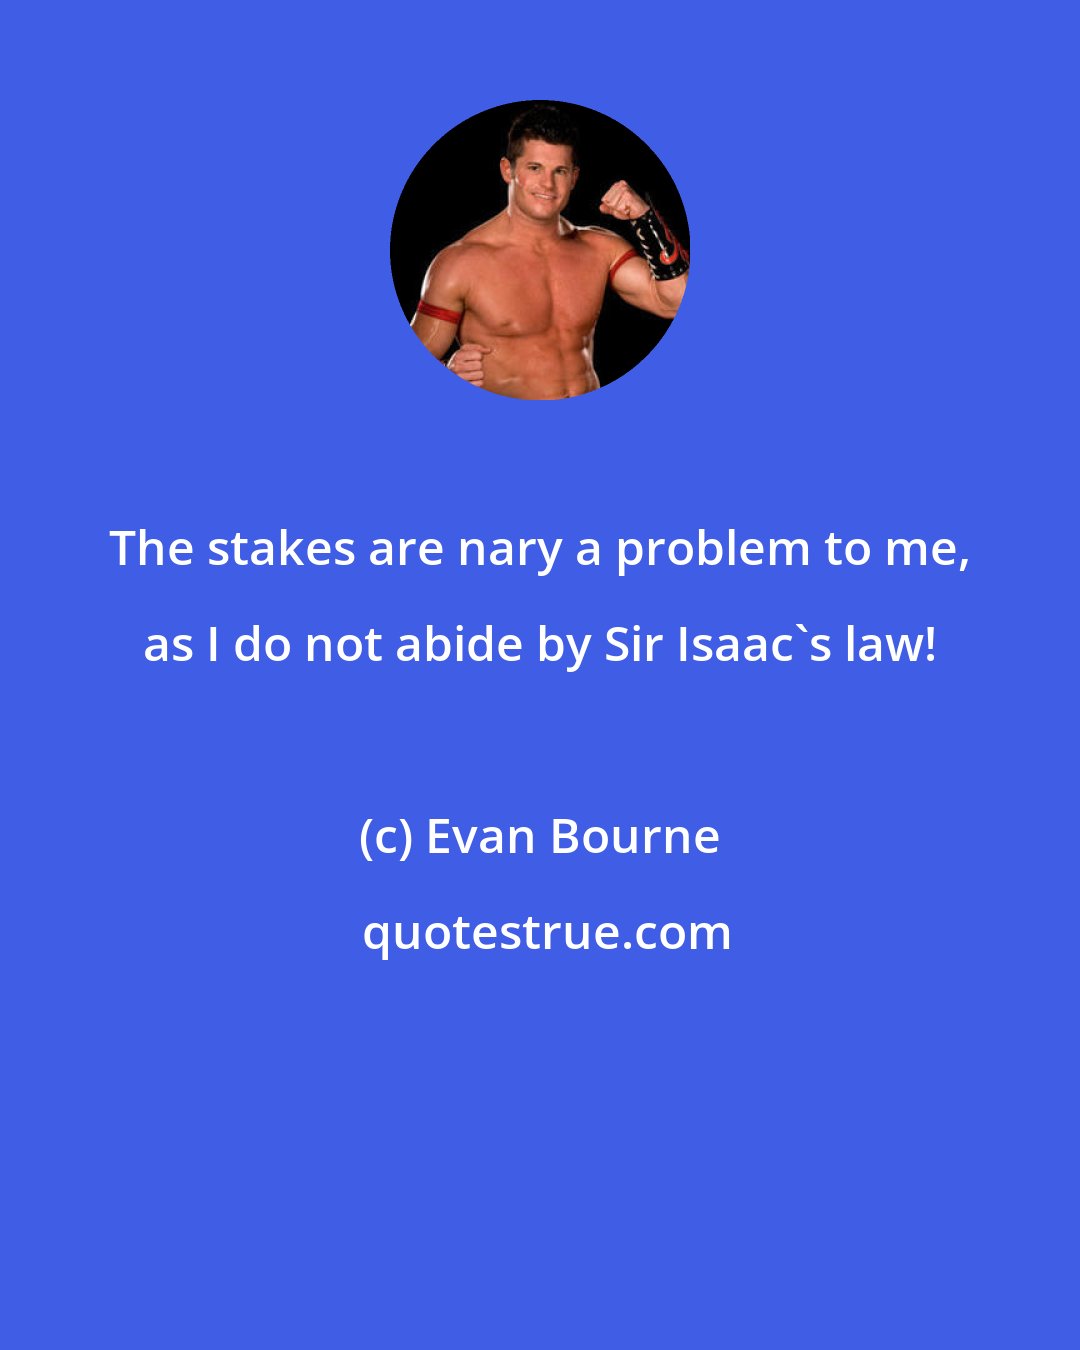 Evan Bourne: The stakes are nary a problem to me, as I do not abide by Sir Isaac's law!